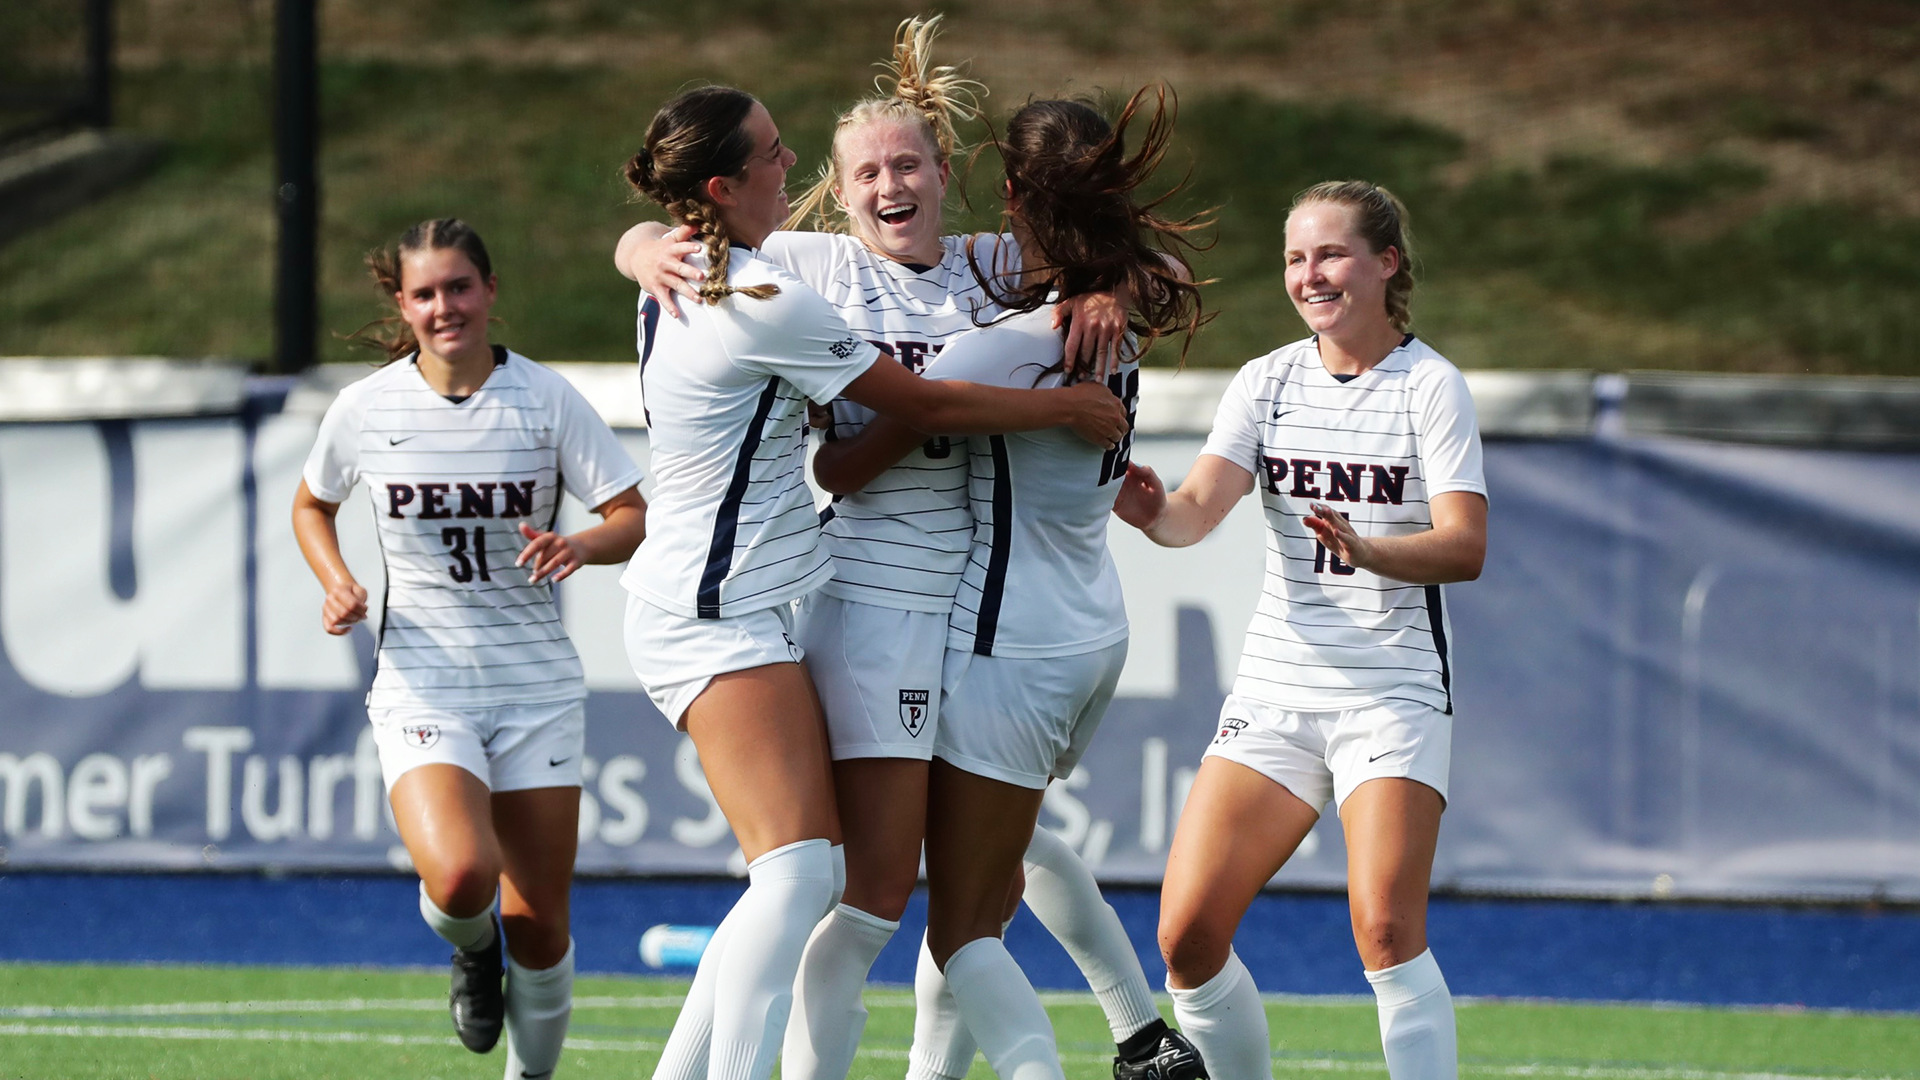 Women's soccer players hug and celebrate after a big moment during a game.